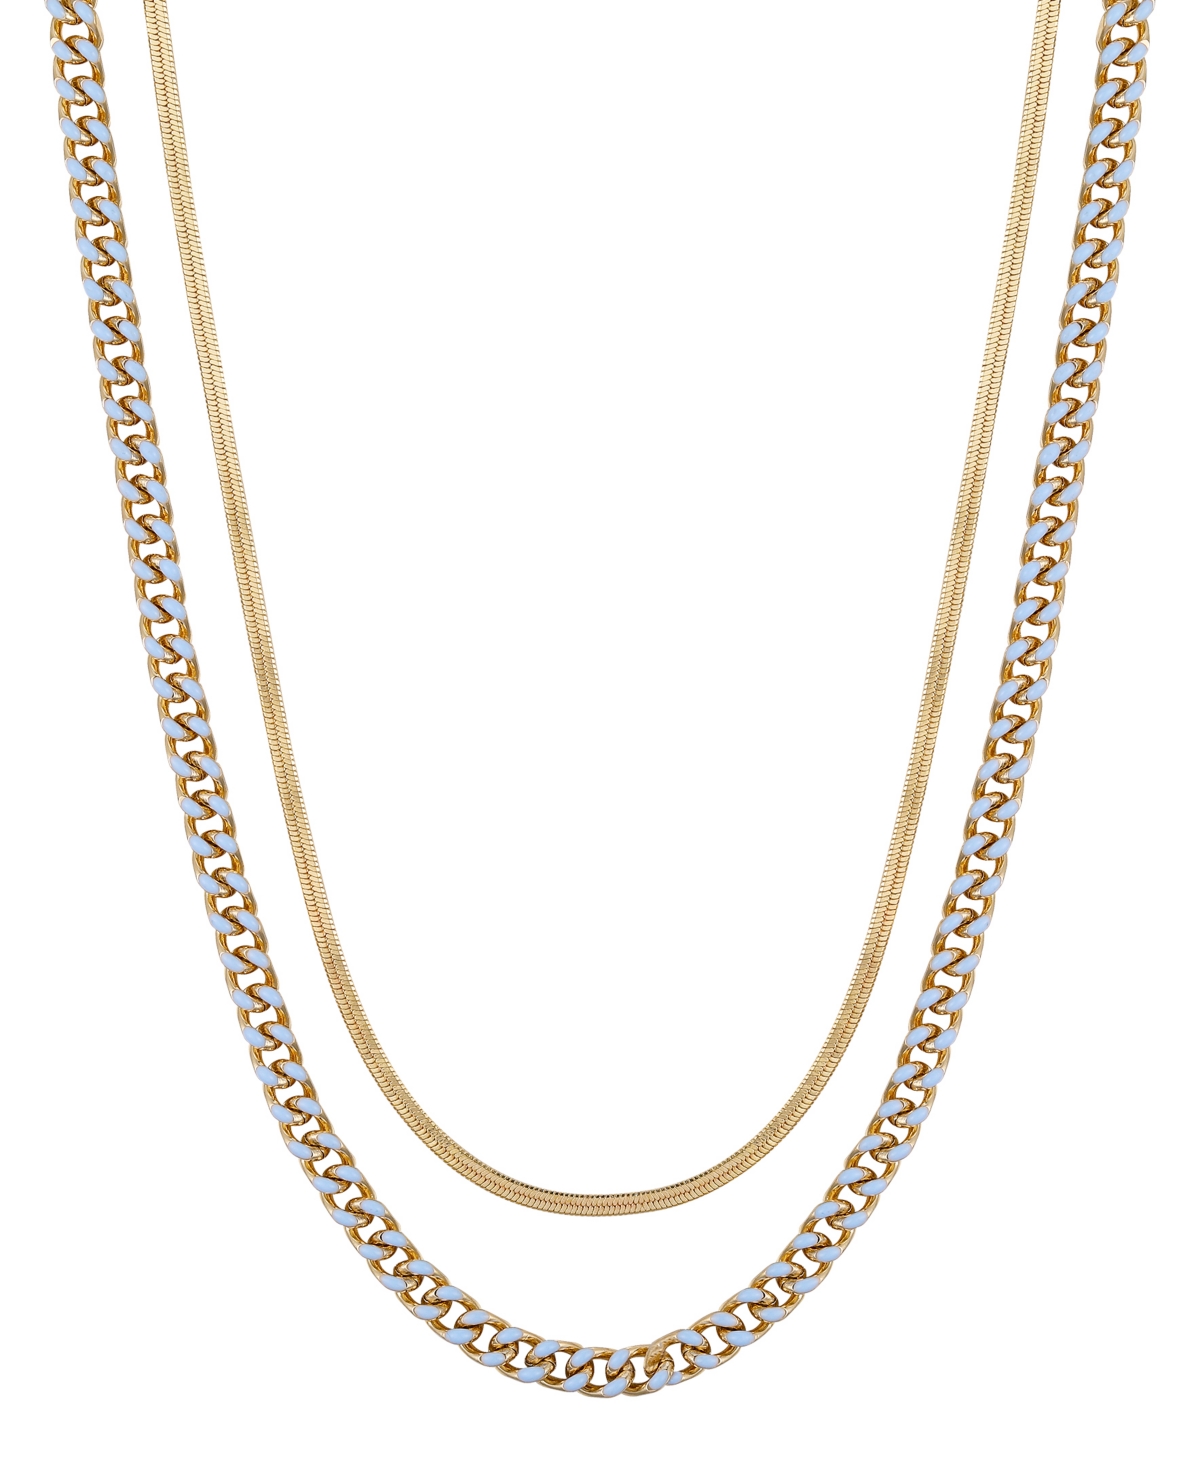 Unwritten 14k Gold Flash-plated Light Blue Enamel Curb Chain And Herringbone Chain Necklace Set